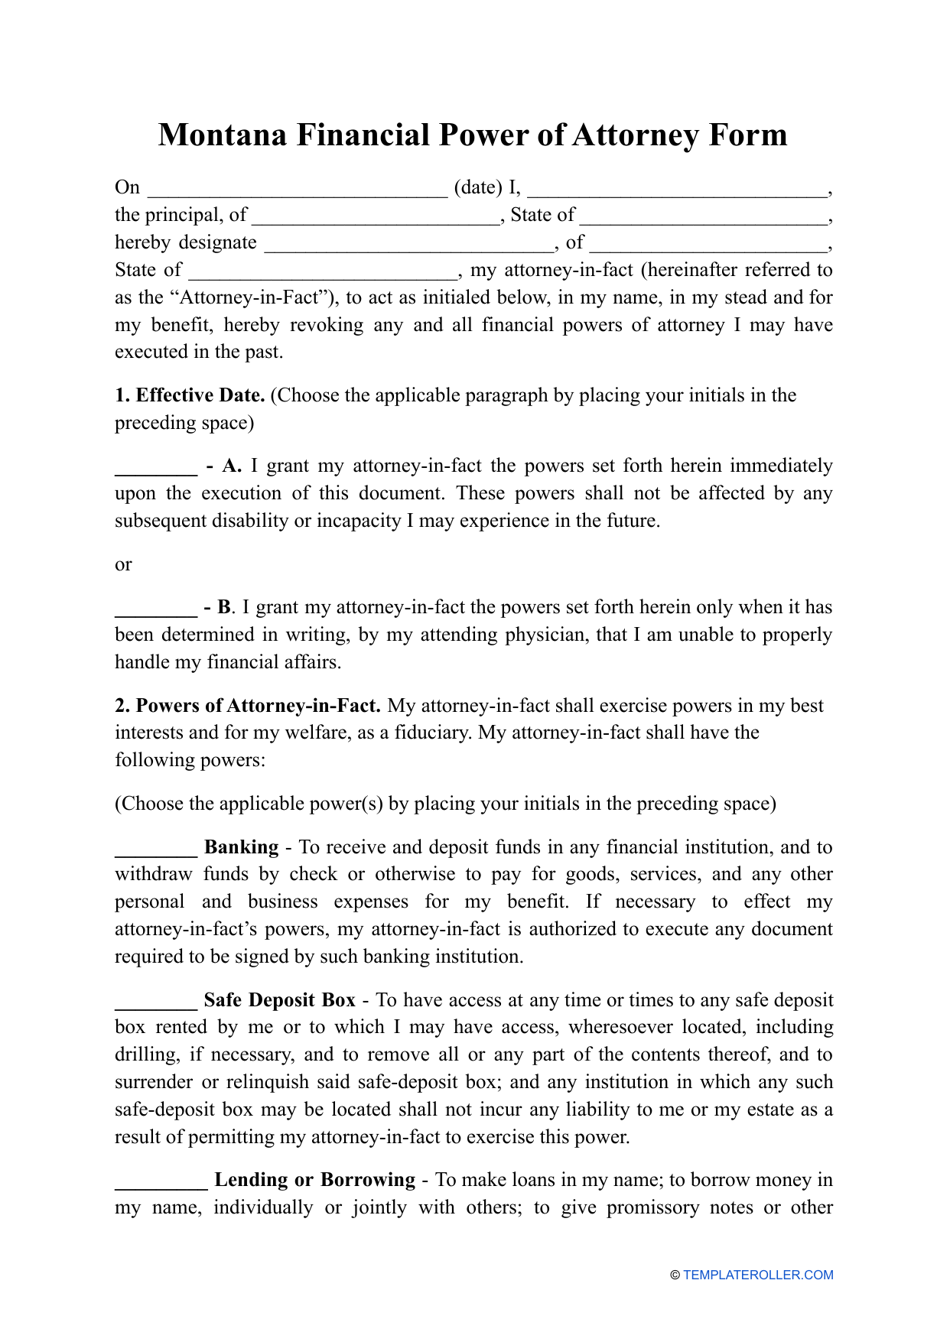 Financial Power of Attorney Form - Montana, Page 1